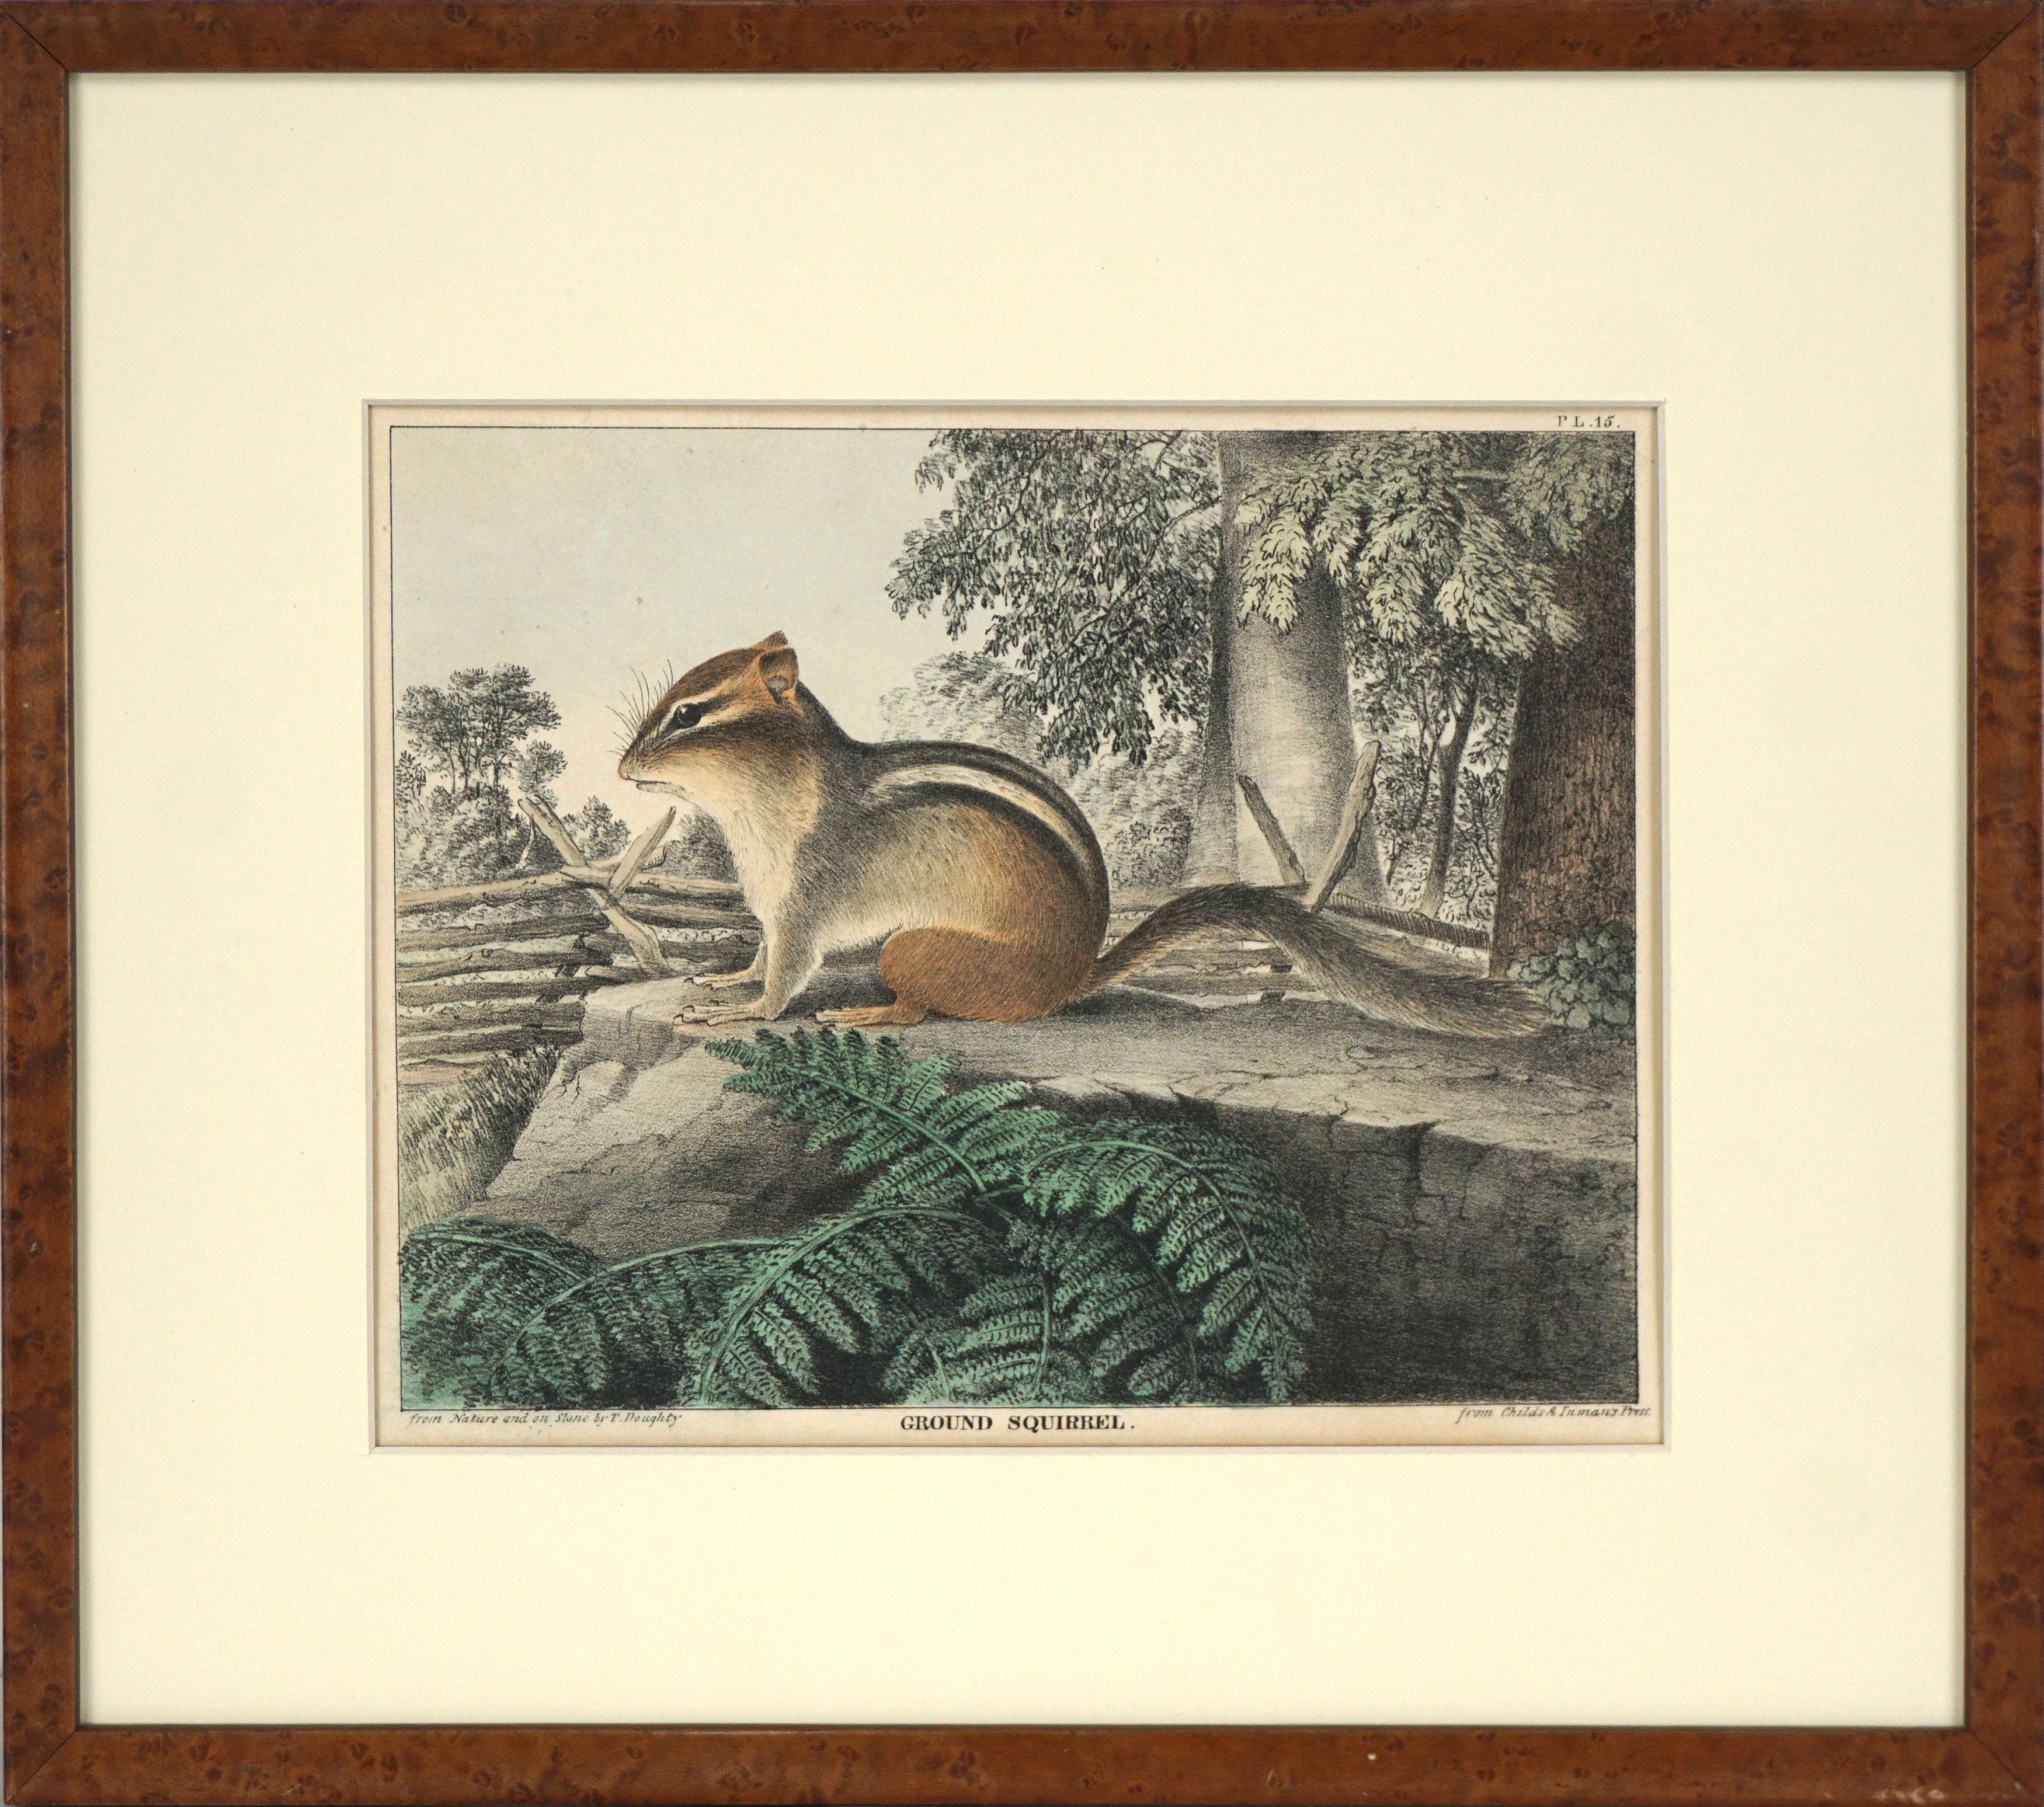 Thomas Doughty Animal Print - 1830's Hand-colored Lithograph of a Ground Squirrel